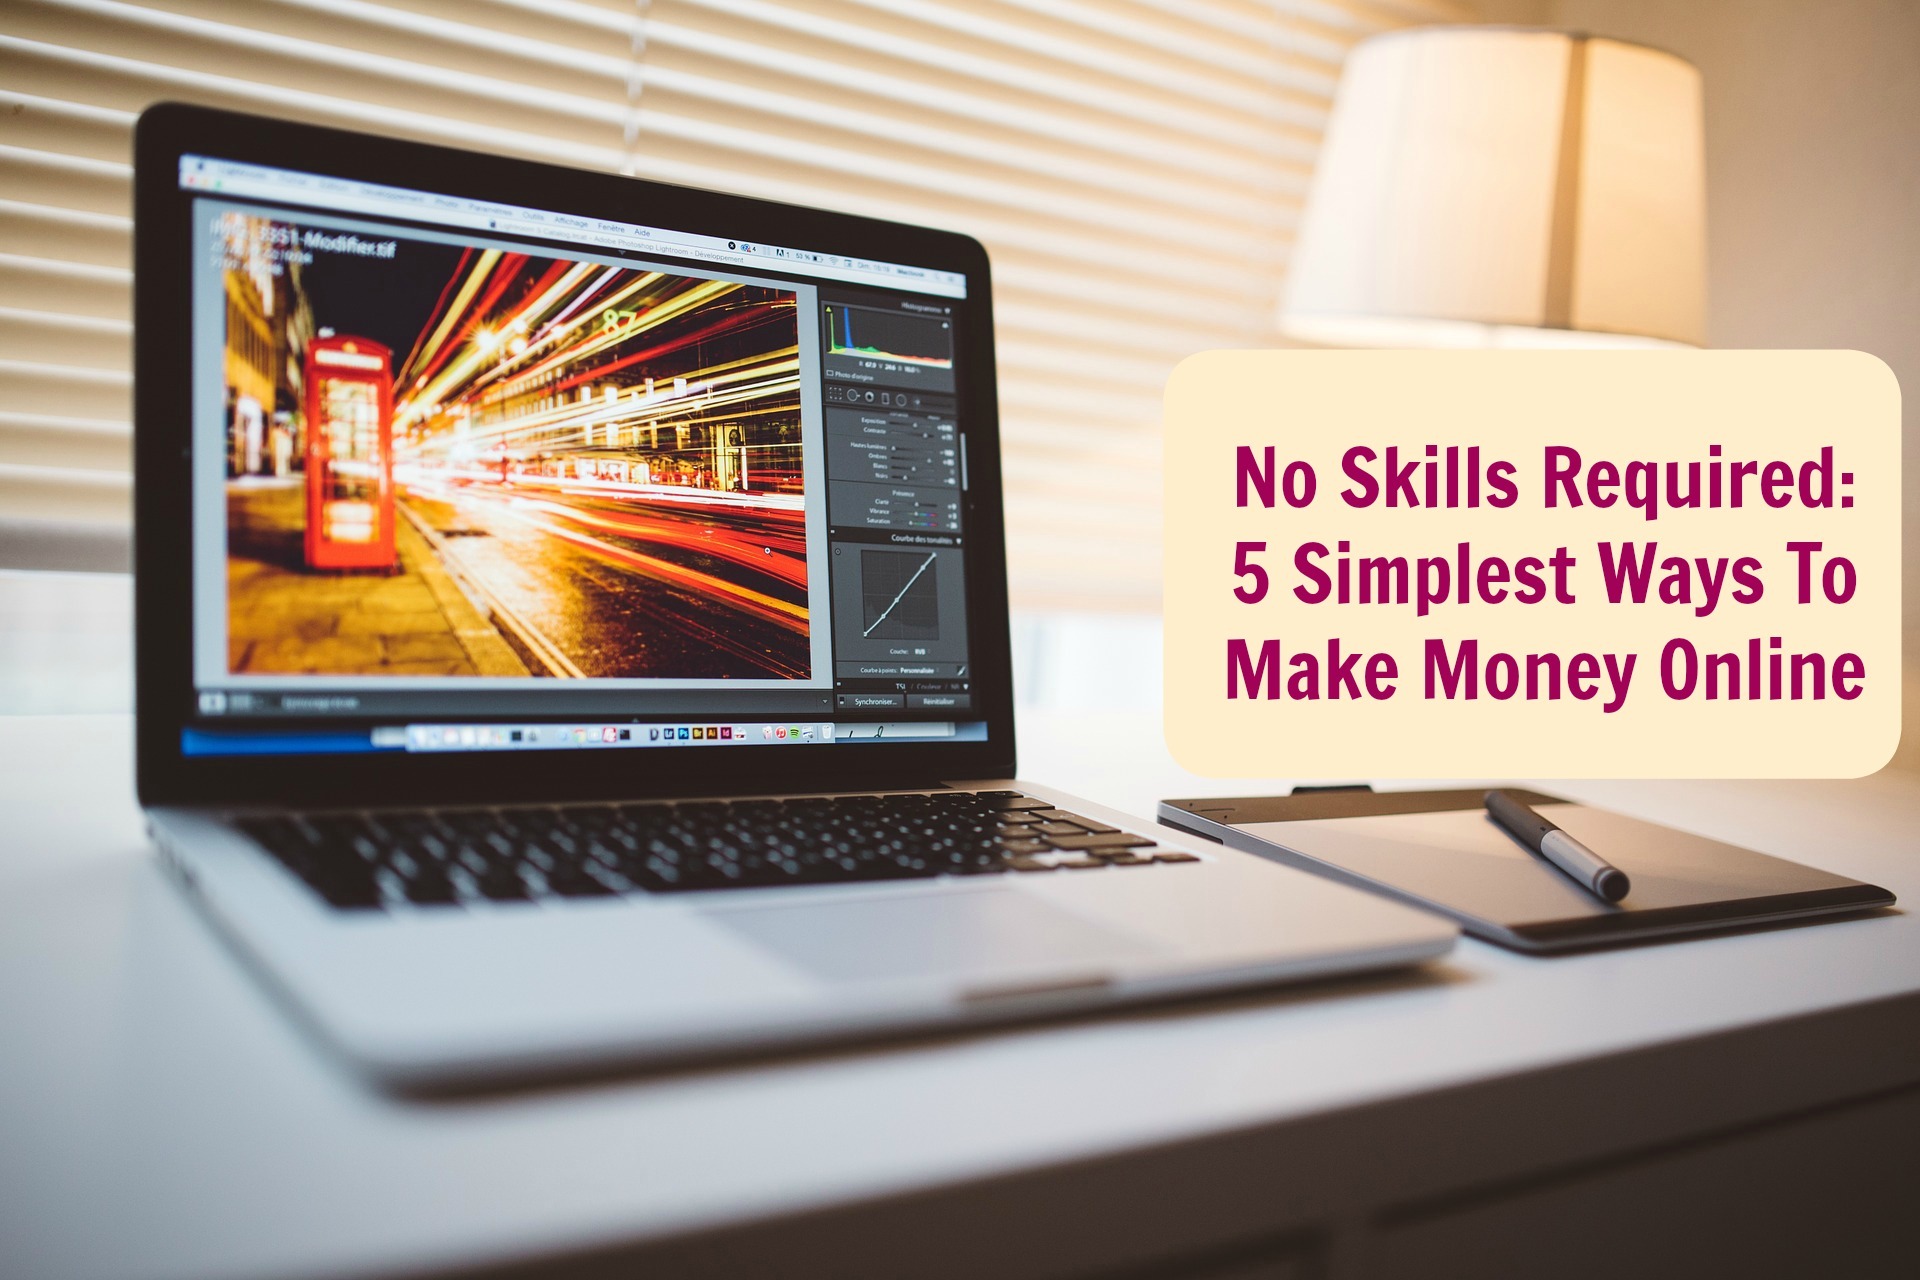 How to earn money online without skills